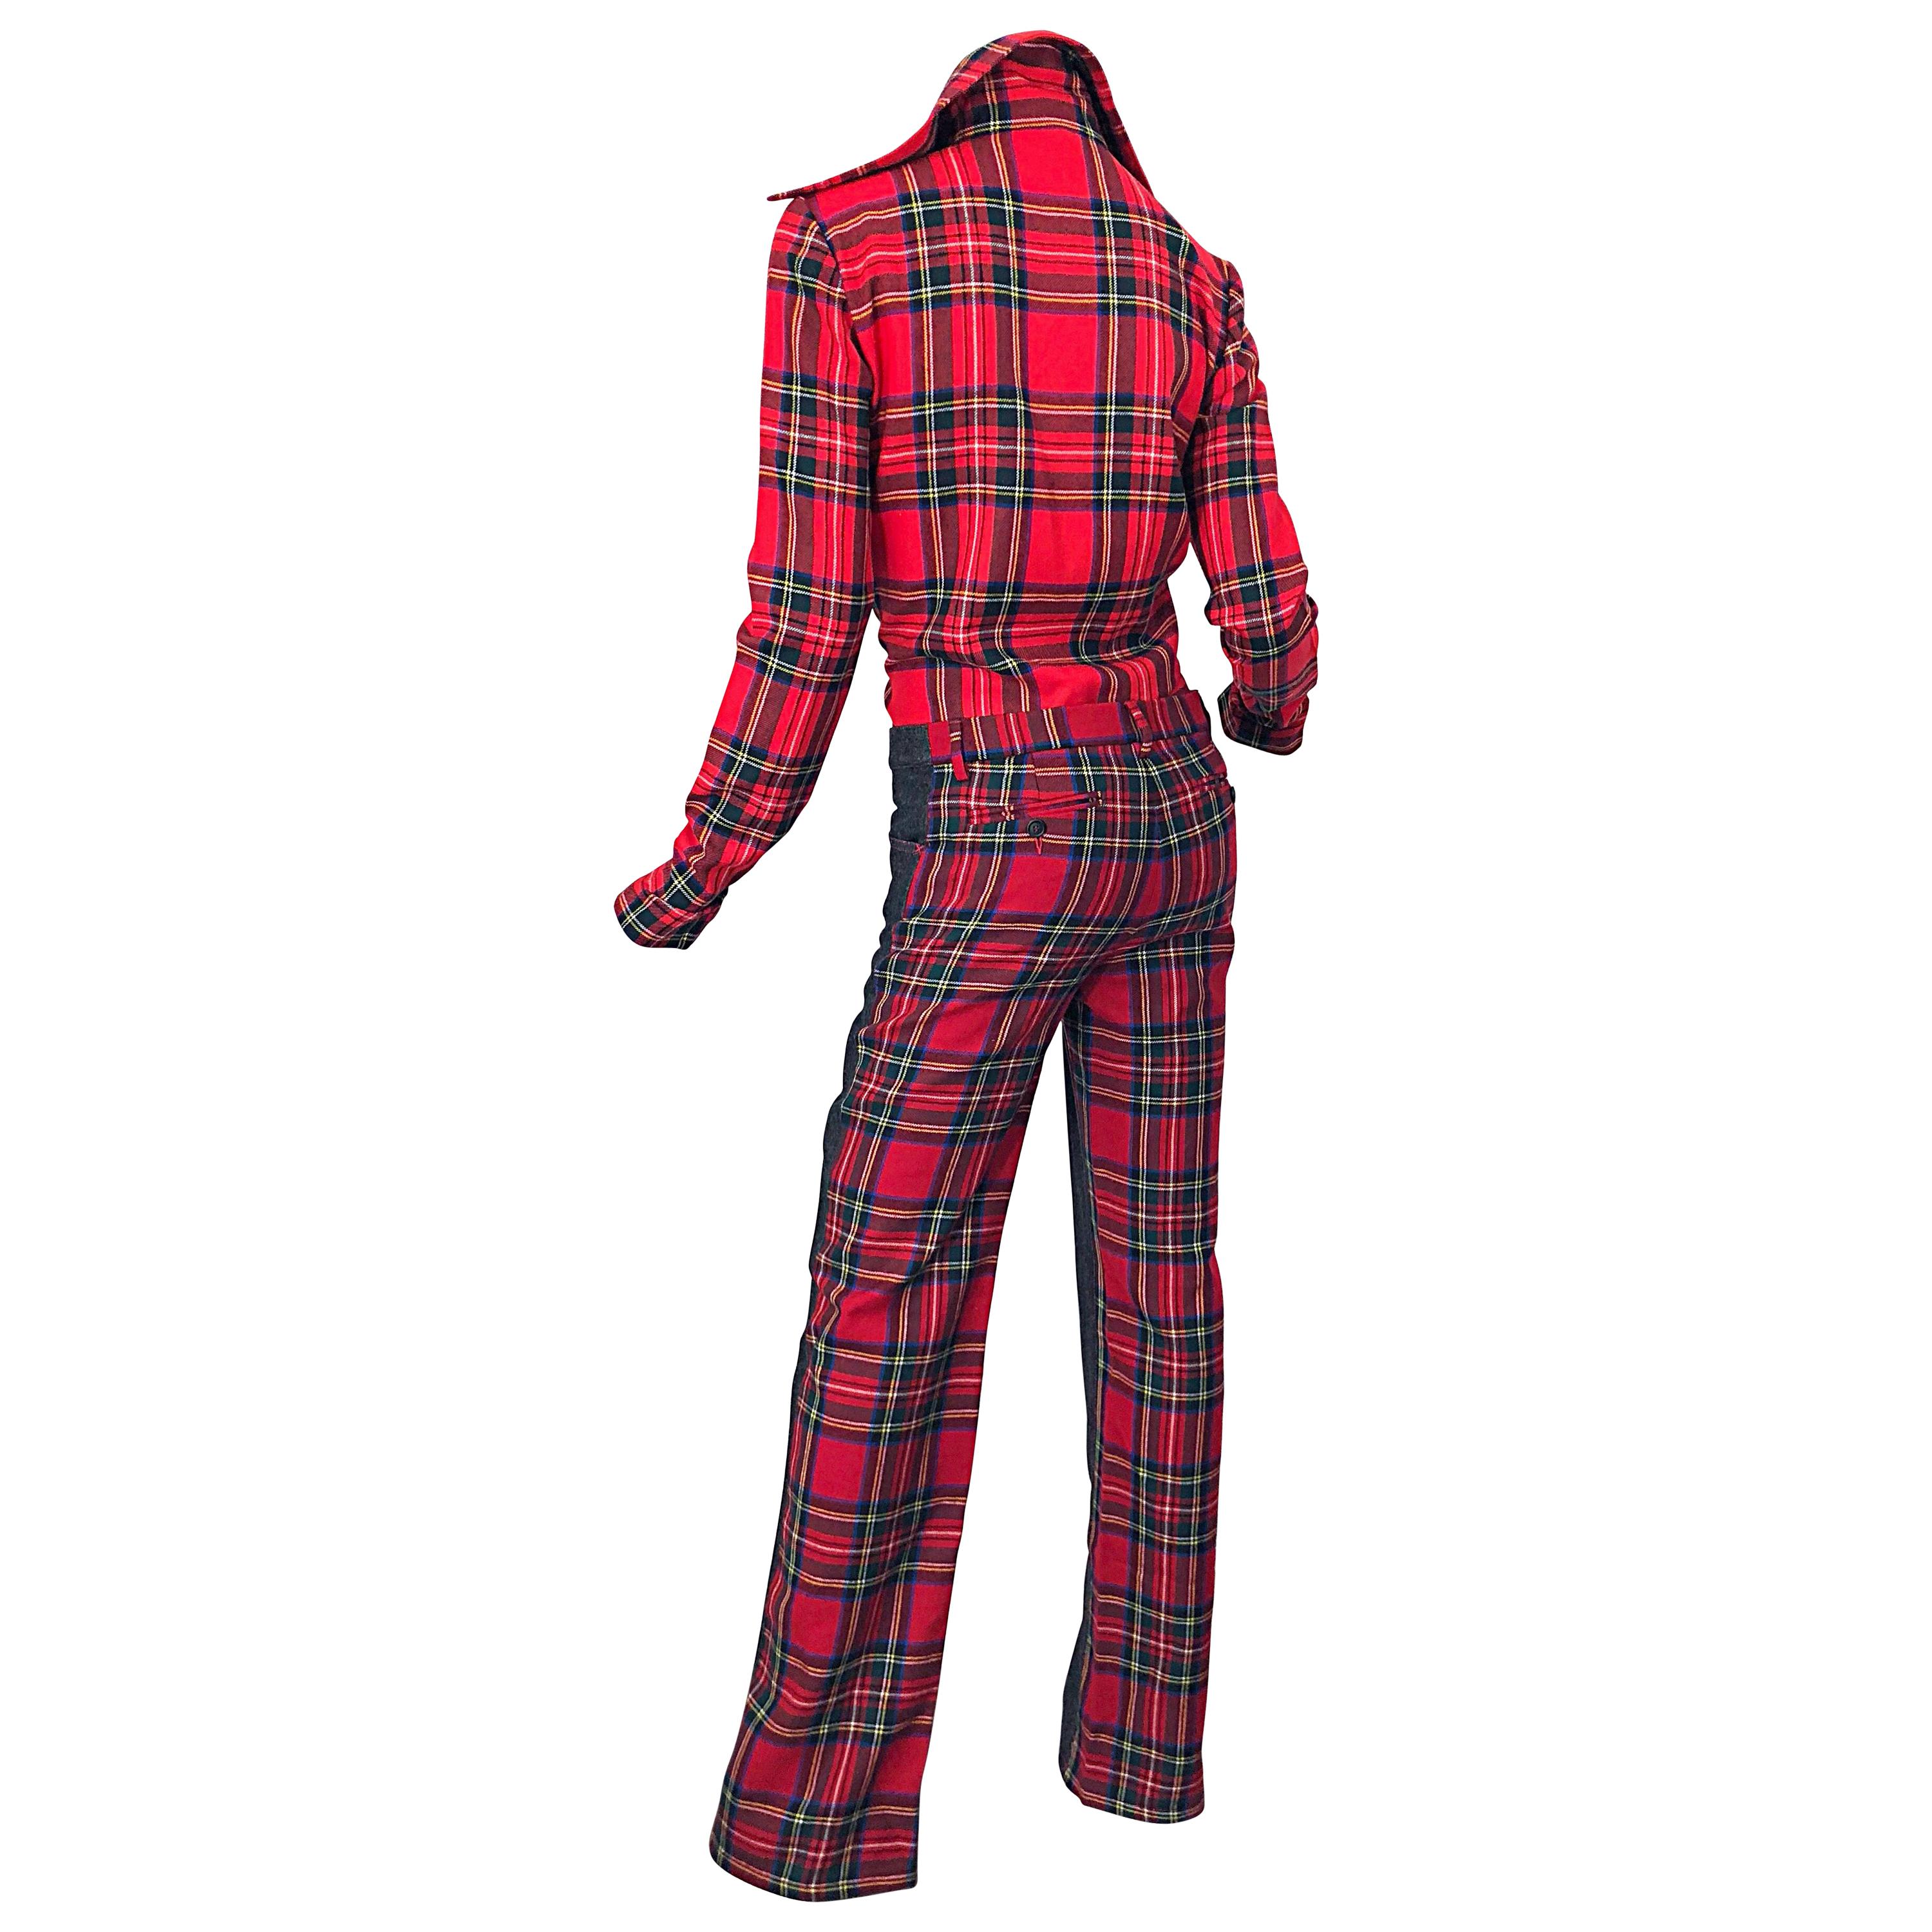 Rare 1990s Dolce & Gabbana Red Tartan Plaid Wool + Denim Flared Jeans and Shirt For Sale